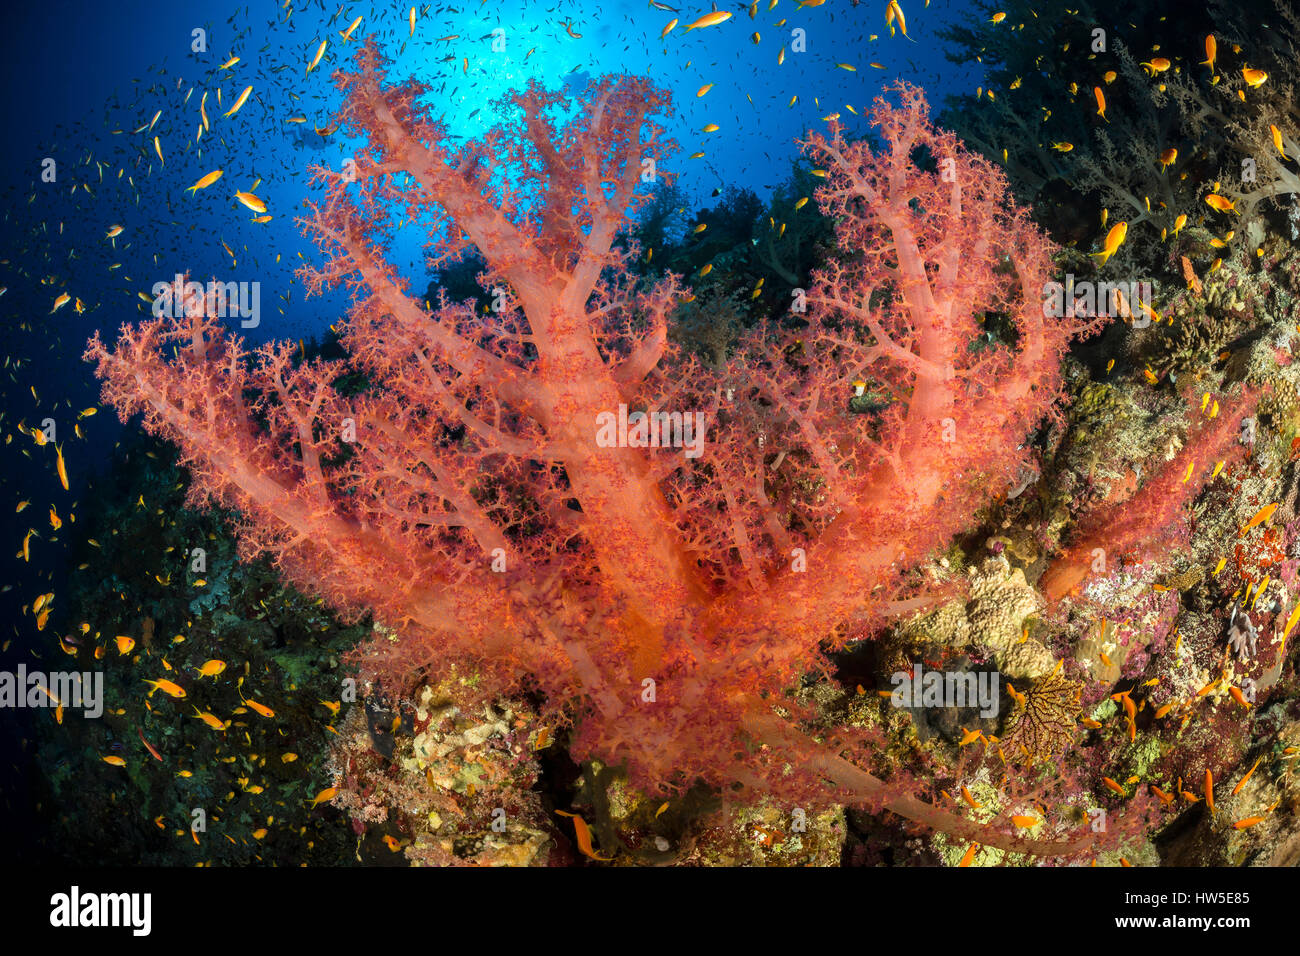 Red soft Coral, Dendronephthya sp., Elphinstone Riff, Rotes Meer, Ägypten Stockfoto